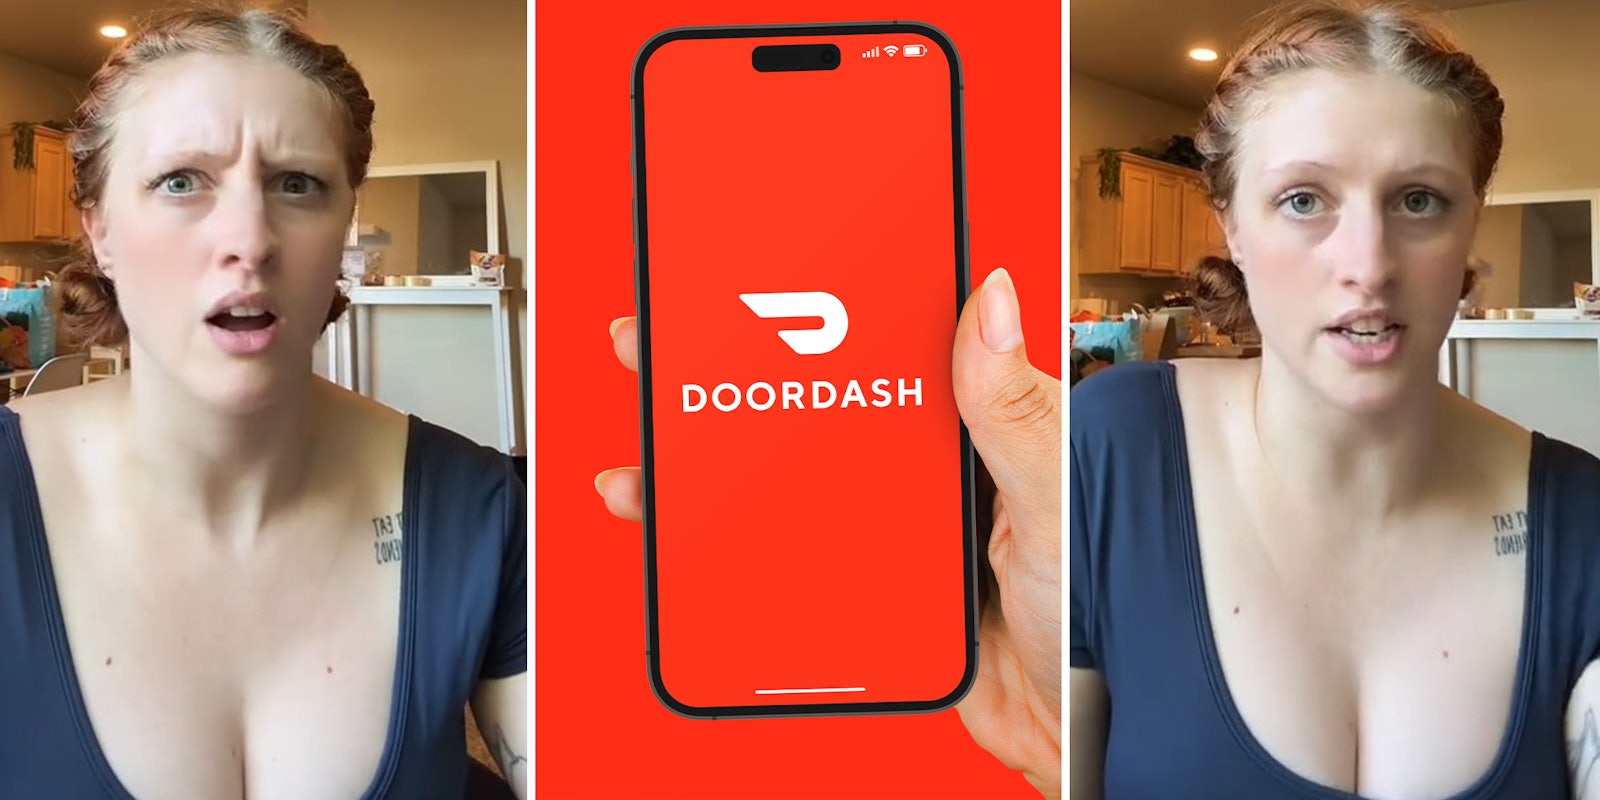 Woman catches male DoorDash driver lying about his gender on the app